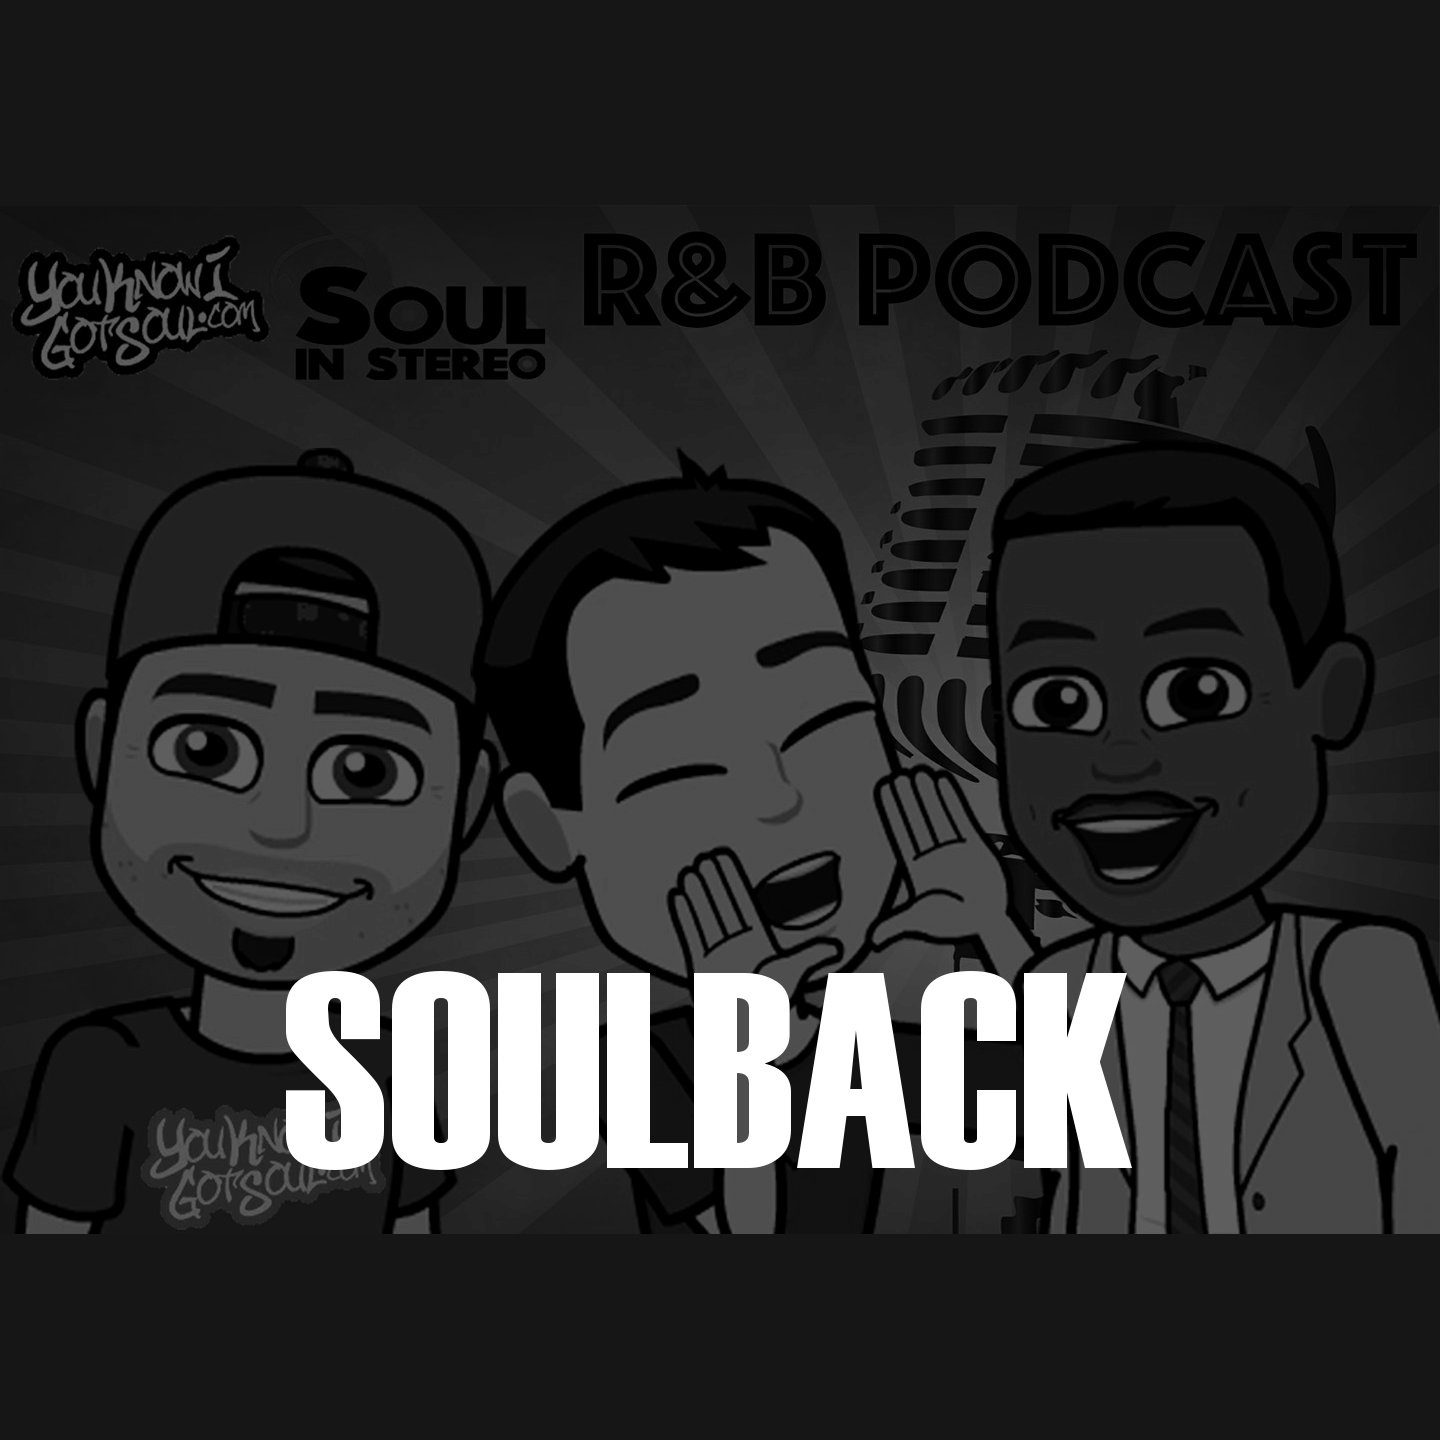 SoulBack (featuring DJ Urban Philosopher) – The R&B Podcast Episode 16